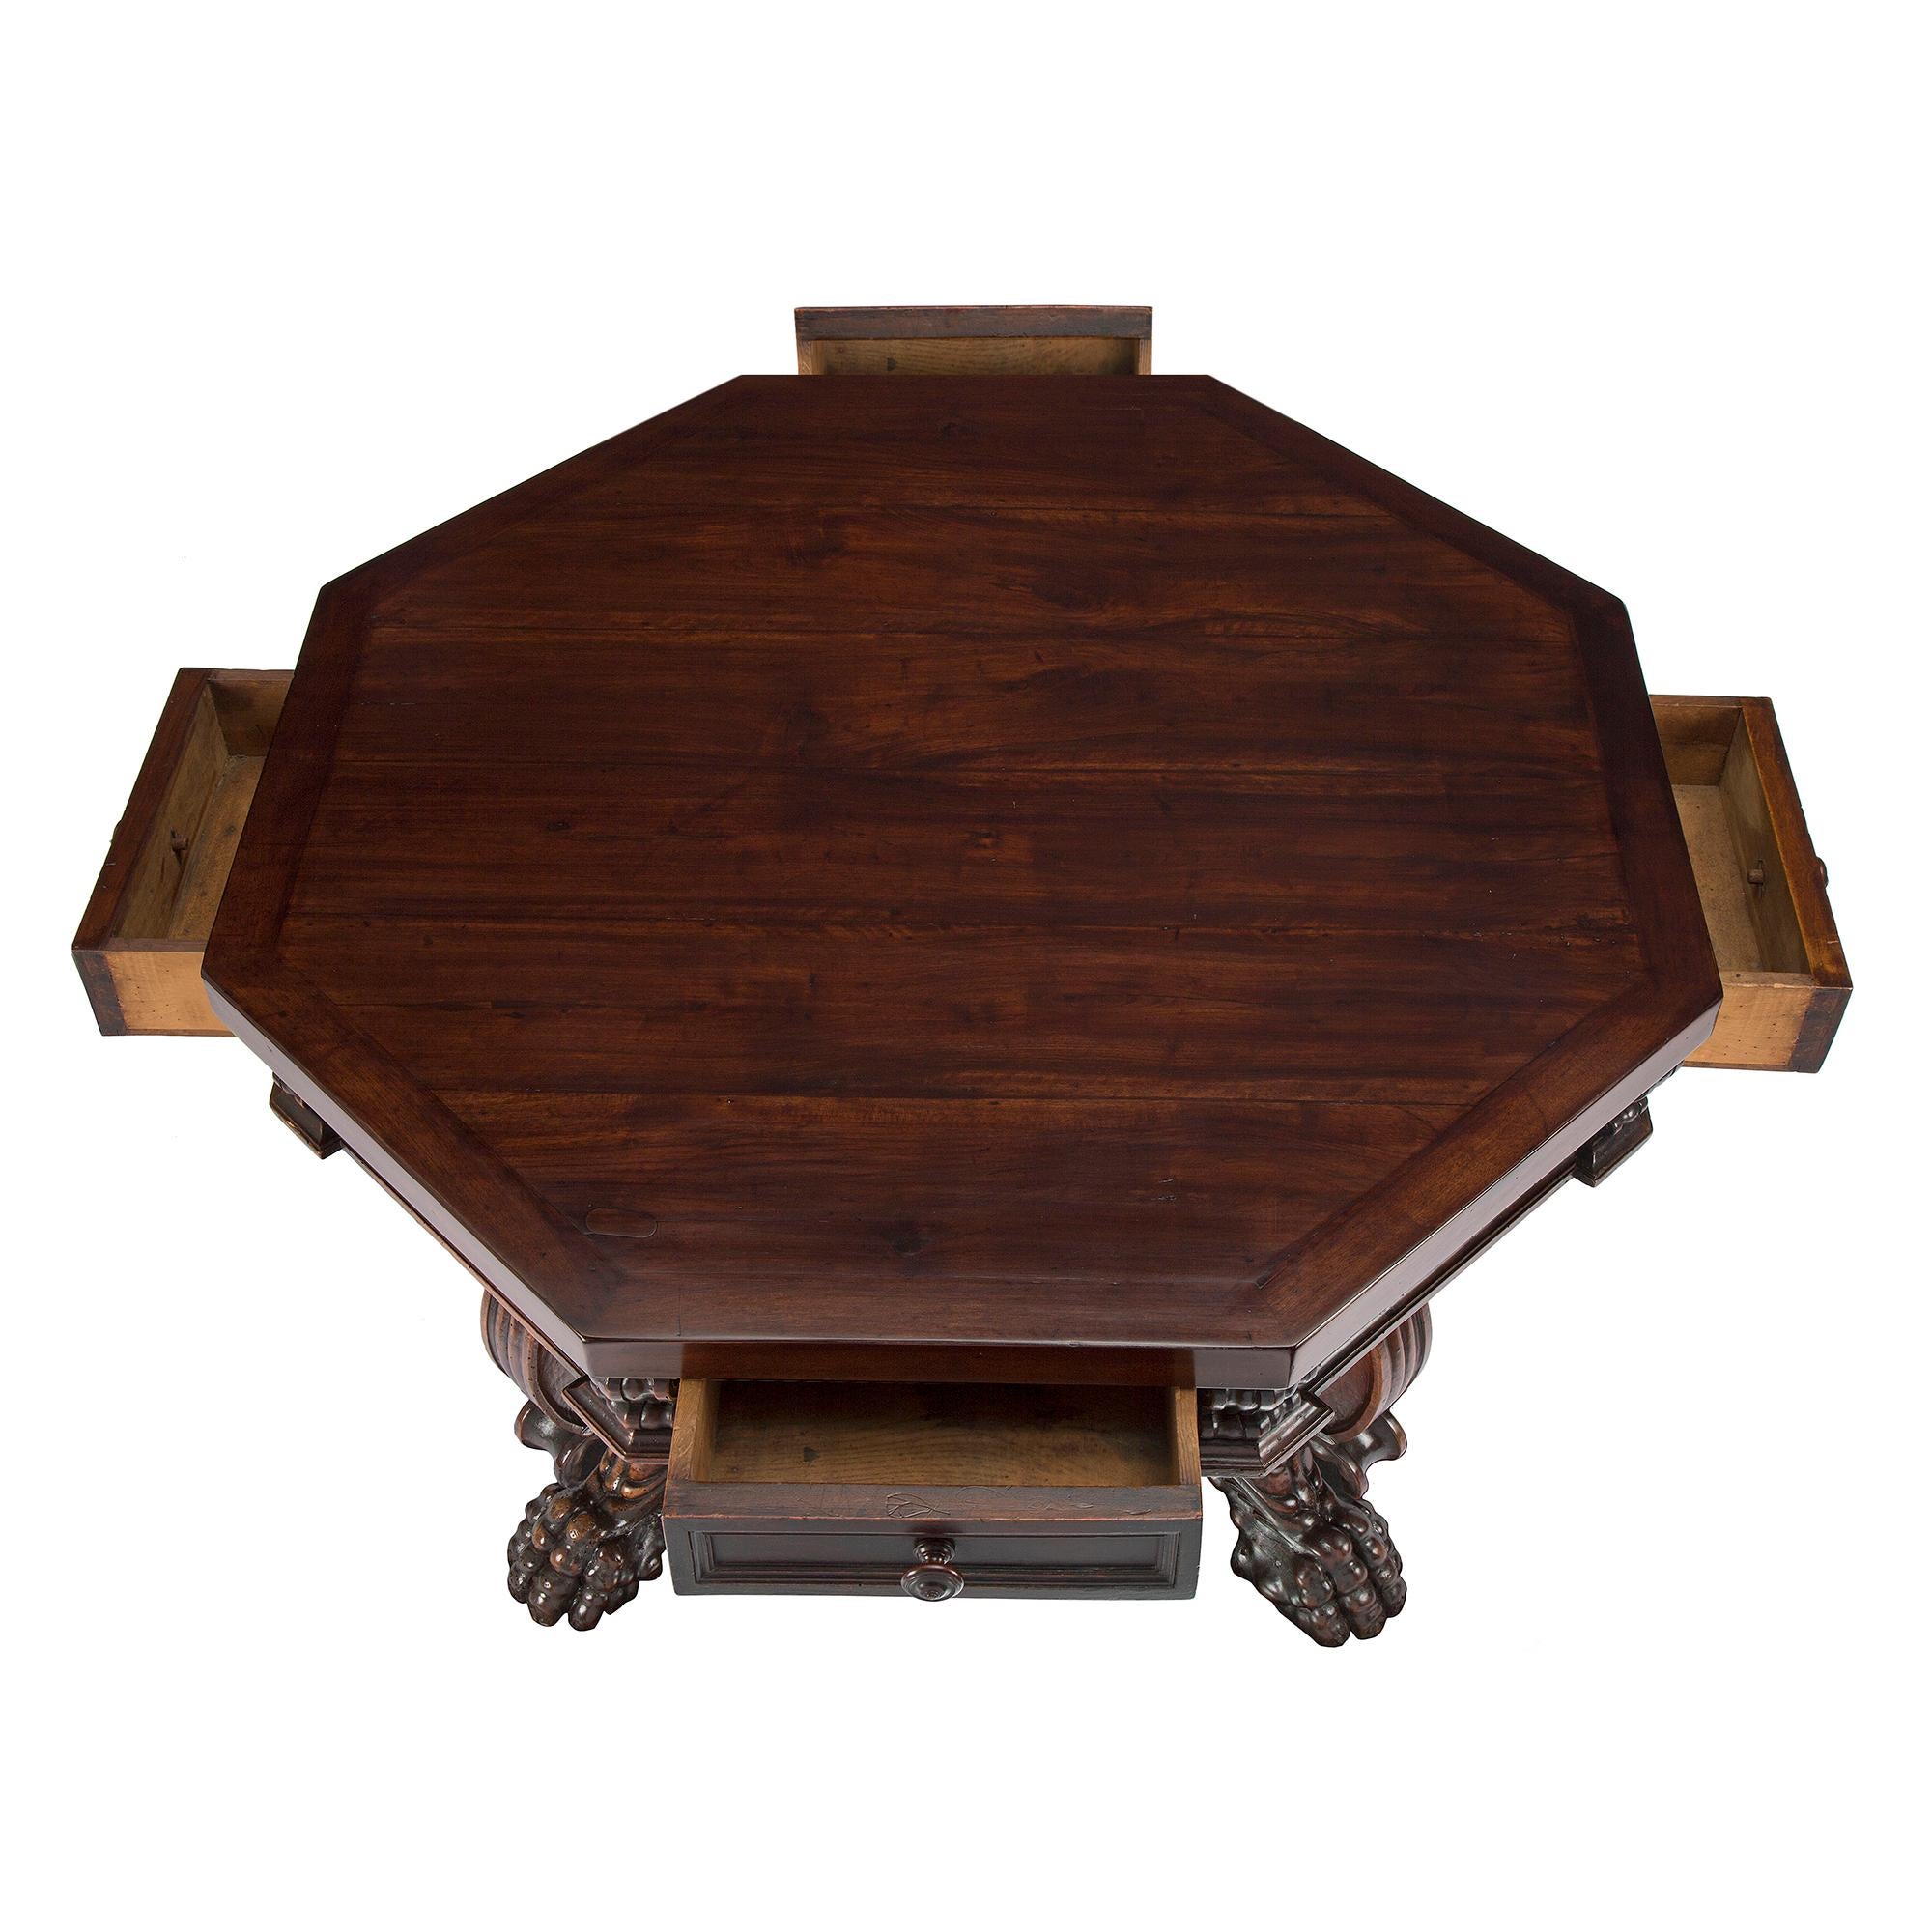 Italian 17th Century Baroque Period Solid Walnut Octagonal Center Table In Good Condition For Sale In West Palm Beach, FL